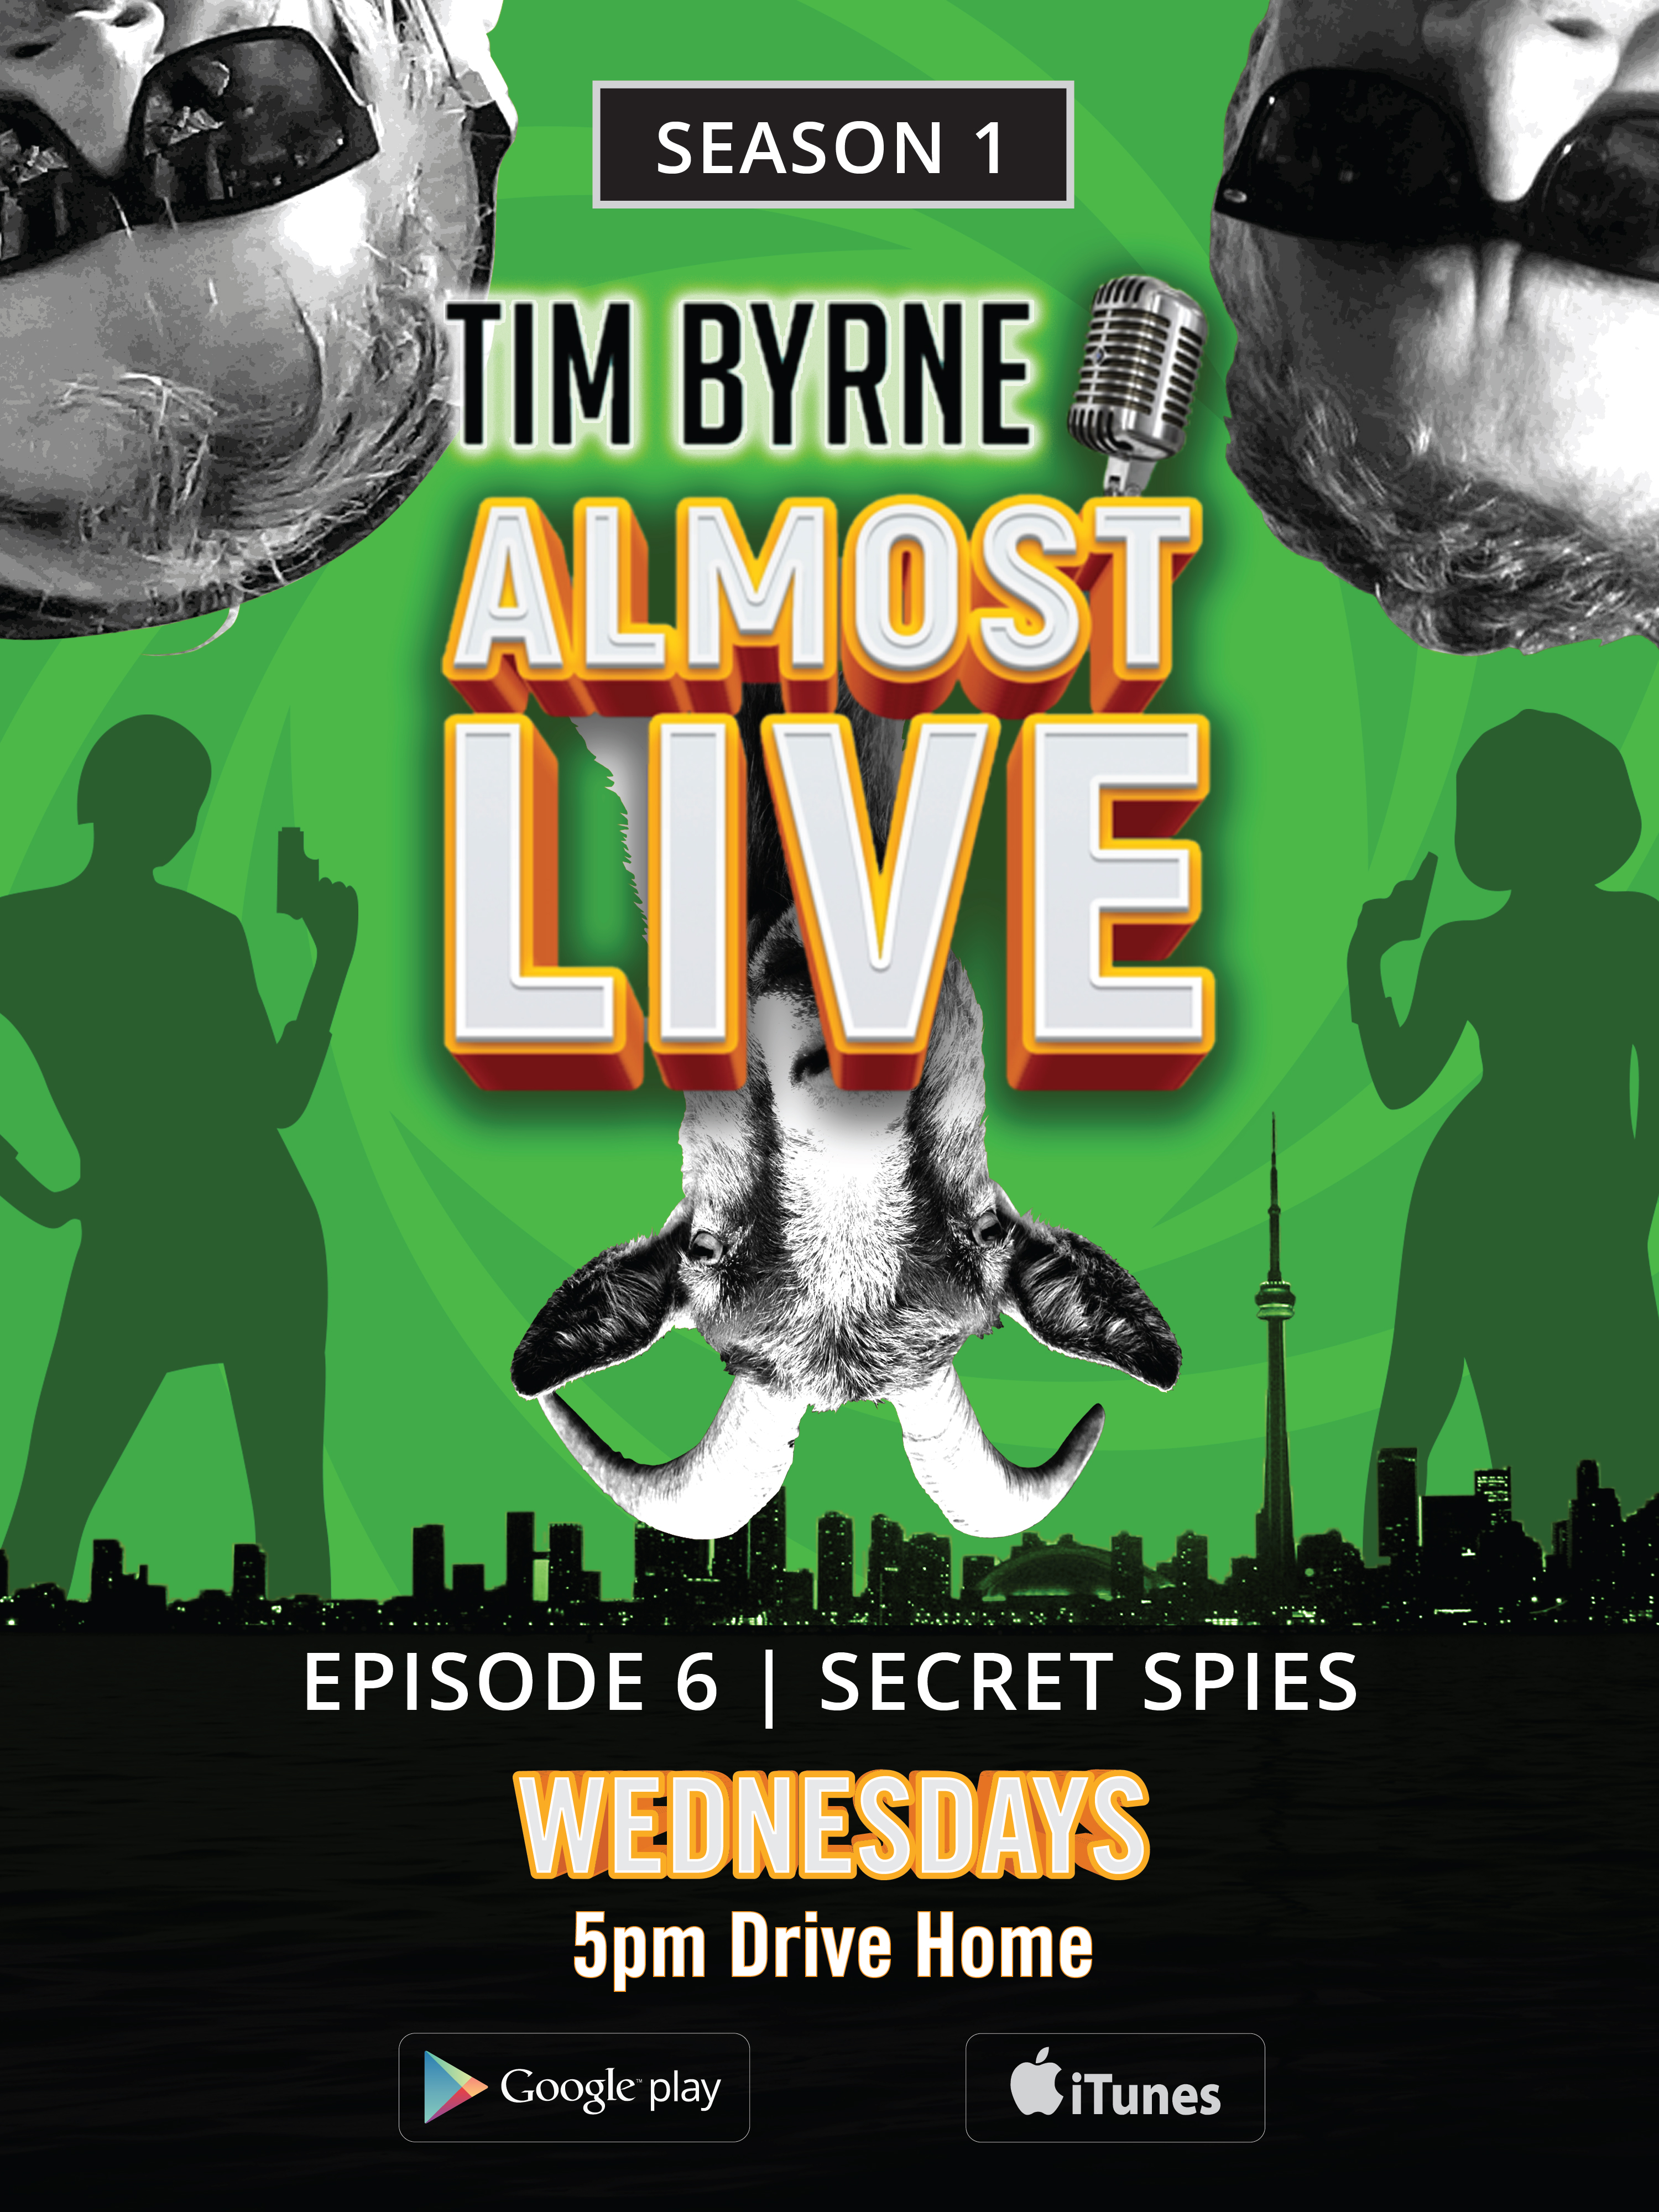 In this edition of TBAL Tim welcomes the founder and managing director of Trust 1 Security in Toronto. Doug and Tim have been friends for many years which is evidenced by Doug being one of the few people left in T.O. willing to come on the podcast! Doug first moved to the city in 1986 and worked as a security guard and later founded a security company with his brother. Five years ago he founded Trust 1 which offers security cameras, card access and alarm monitoring services. Tim find that business painfully boring which he was quick to emphasize during his conversation with Doug. “That sounds wickedly boring,” he says to Doug. “It's not,” Doug replies. “It's technology and I love technology.” Unperturbed, Tim continues this line of offensive questioning. “But aren't you in an industry that's dying because of companies like Ring and Nest?” he asks. Doug calmly explains that there is a difference between a Mercedes and a Hyundai. If you manage the Eaton Centre and you install Ring as your security camera you're being grossly incompetent. There's a huge limitation to those entry-level systems. There's really impressive new technology in the security sector, Doug continues. There are systems that will alert a guard when someone walks into a section of the building that's been flagged. And there are also sophisticated facial recognition systems that will alert security guards when a banned person enters the building. The conversation quickly veers from professional concerns to (as is often the case) Tim talking about himself. “I think my reputation proceeds me,” Tim tells Doug. “I think people think I'm rough around the edges and eccentric and brutal.” Doug assures him that's not the case but points out that Tim has been incredibly visible in the industry for a very long time. Tim recounts the difficulties of booking guests for this podcast. Everyone at Stadia and Byrne on Demand hates the podcast, he says. But it's not just Tim's staff that think this show is a bad idea. Many of Tim's clients hate it too. Just the other days a major client threatened to pull all their business if Tim ever mentions his company again. What's even more disturbing to Tim is the fact that the CEO of that company has never met Tim. “You should go and meet with him,” Doug advises. “Tell them you are different for any number of reasons but you aren't a threat to him. The conversation suddenly snaps back to Doug's business when Tim asks him if he has ever lied to a client. “Never!” Doug replies. Tim is unconvinced but Doug goes on to explain that the only way to run a business is to speak truth to power. He means that you have to tell the client what they need to hear even if it's uncomfortable sometimes. Tim and Doug wrap up their lively chat with a conversation about clients. “Who do hate working for?” Tim asks. Doug deftly dodges the question but does answer the follow-up about which companies he loves working for. For the answer you'll have to listen to the end of the episode! Tim ends this episode by thanking Doug for taking a big risk by appearing on the most hated podcast in the industry. “Gretzky says you can't score if you don't take a shot,” Doug says.